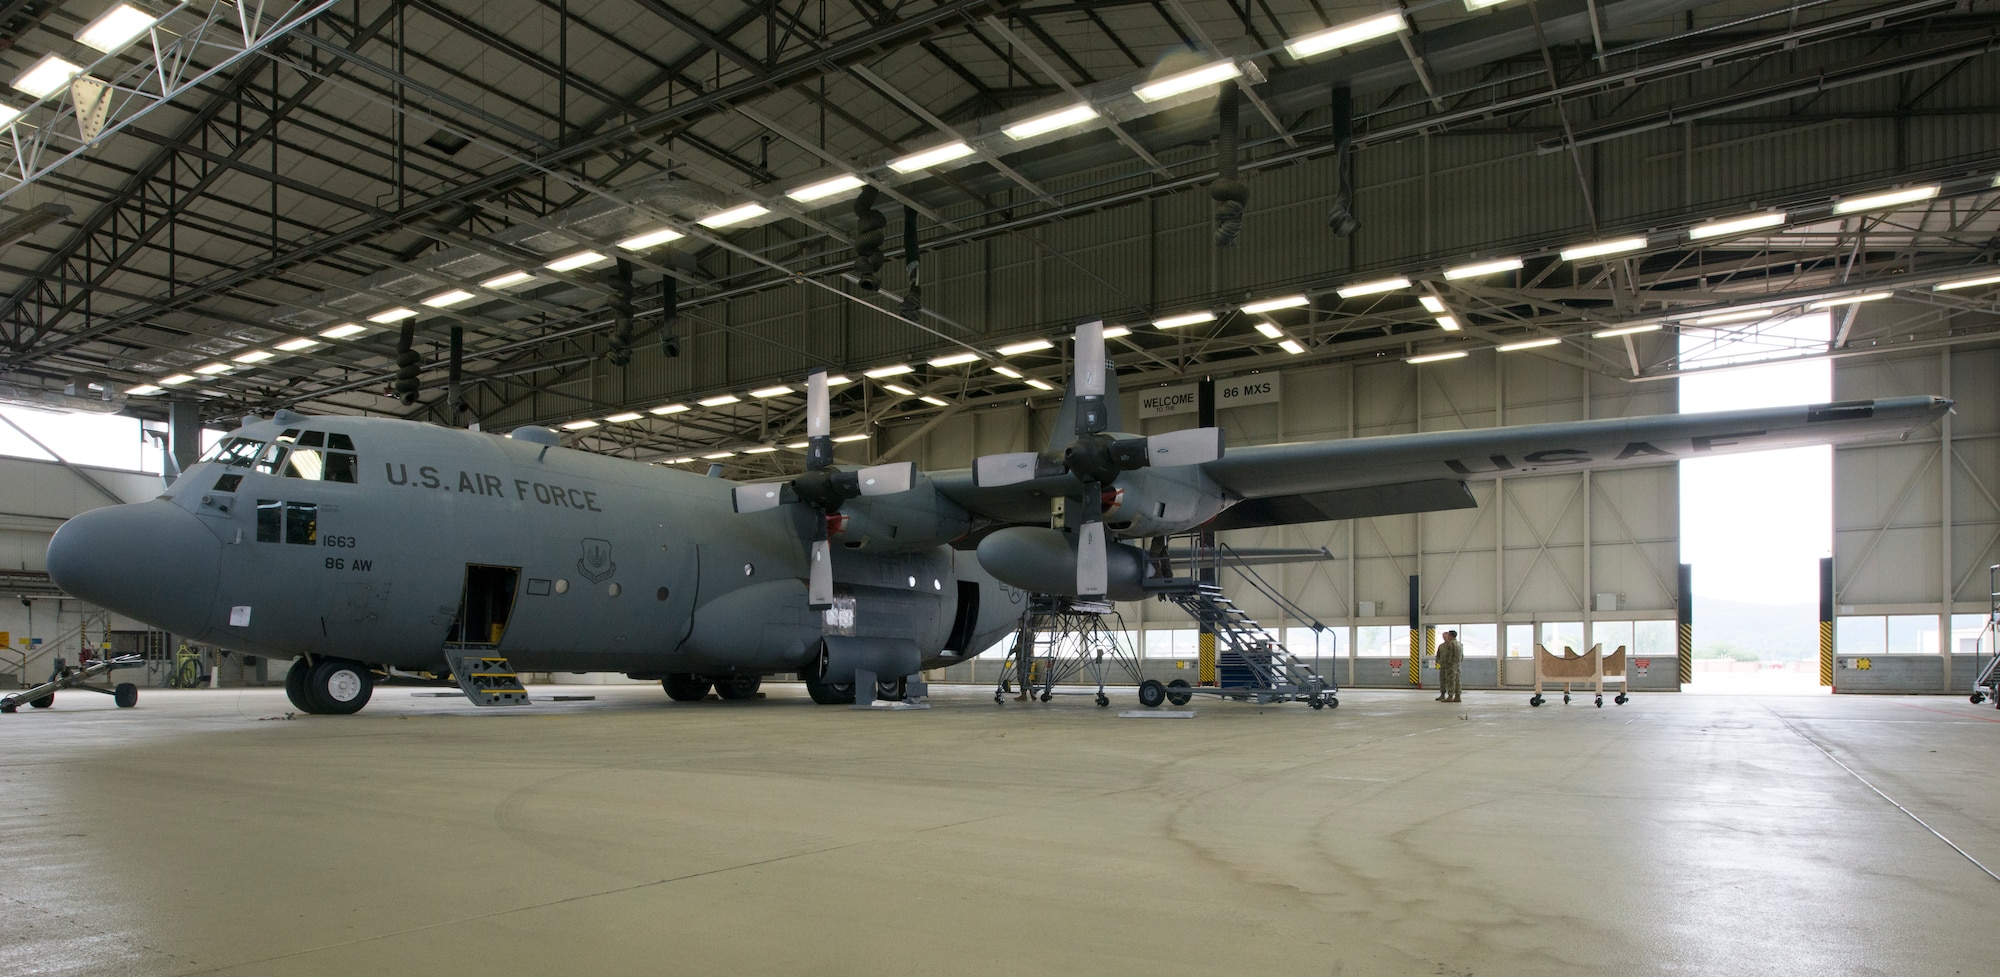 A photo of an aircraft resting in a hangar.